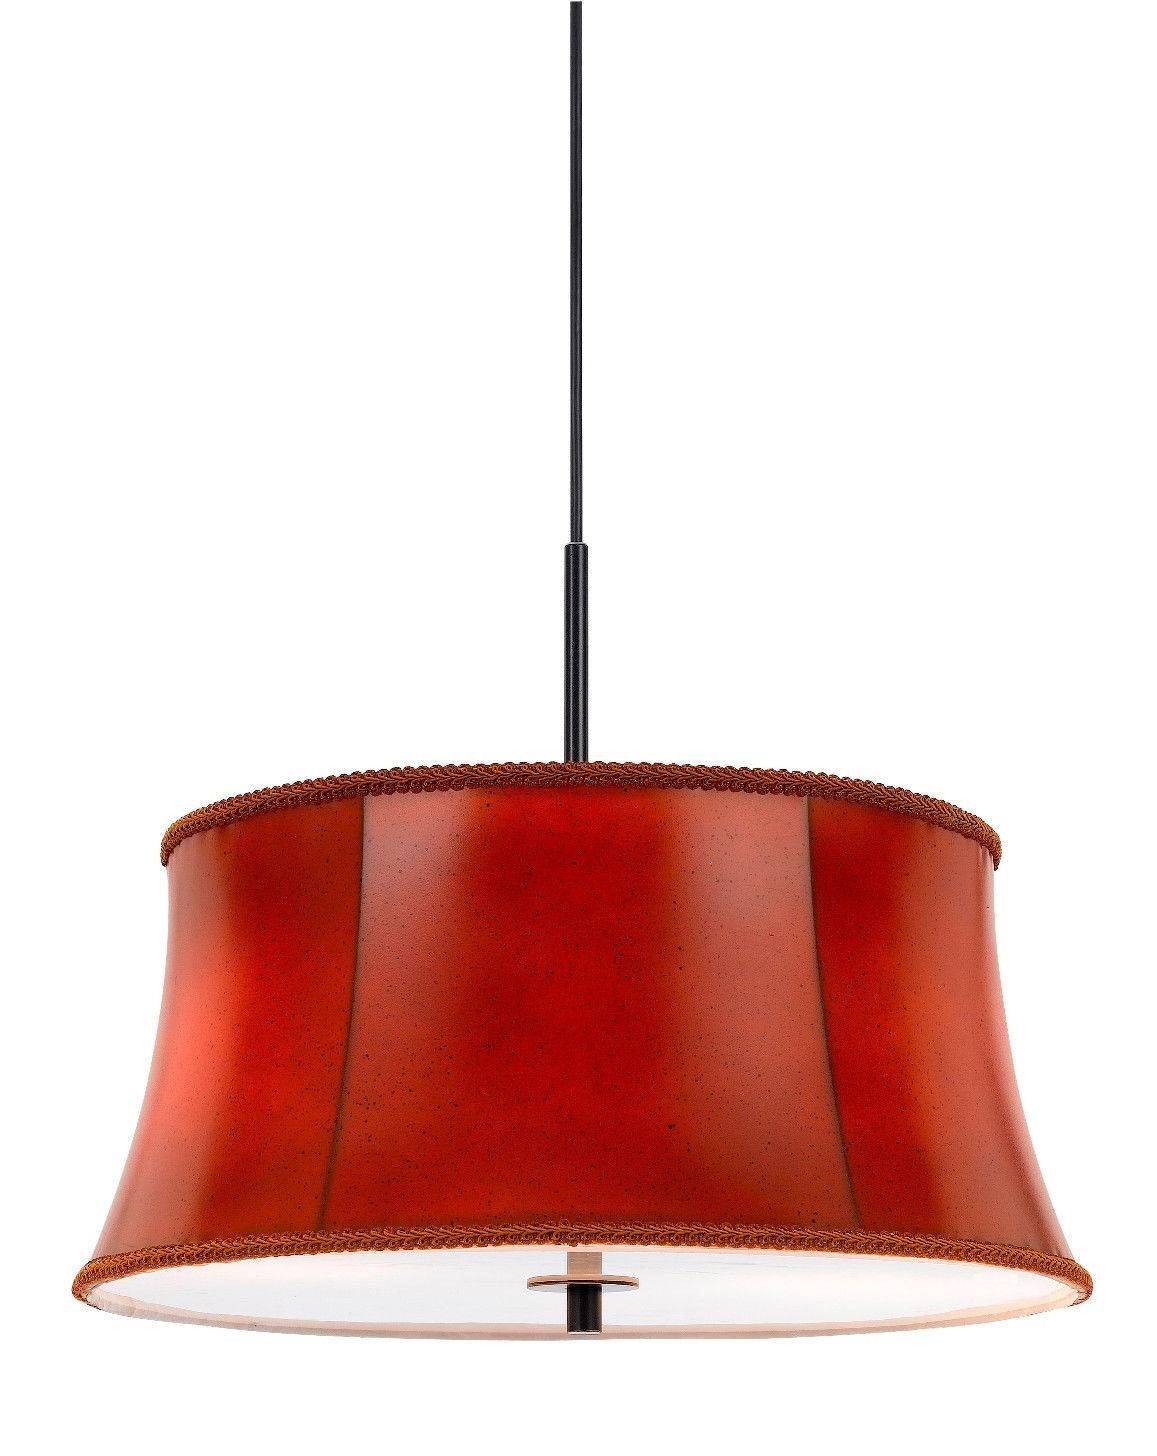 Drum Pendant Lighting | Home Designs Within Red Drum Pendant Lights (View 7 of 15)